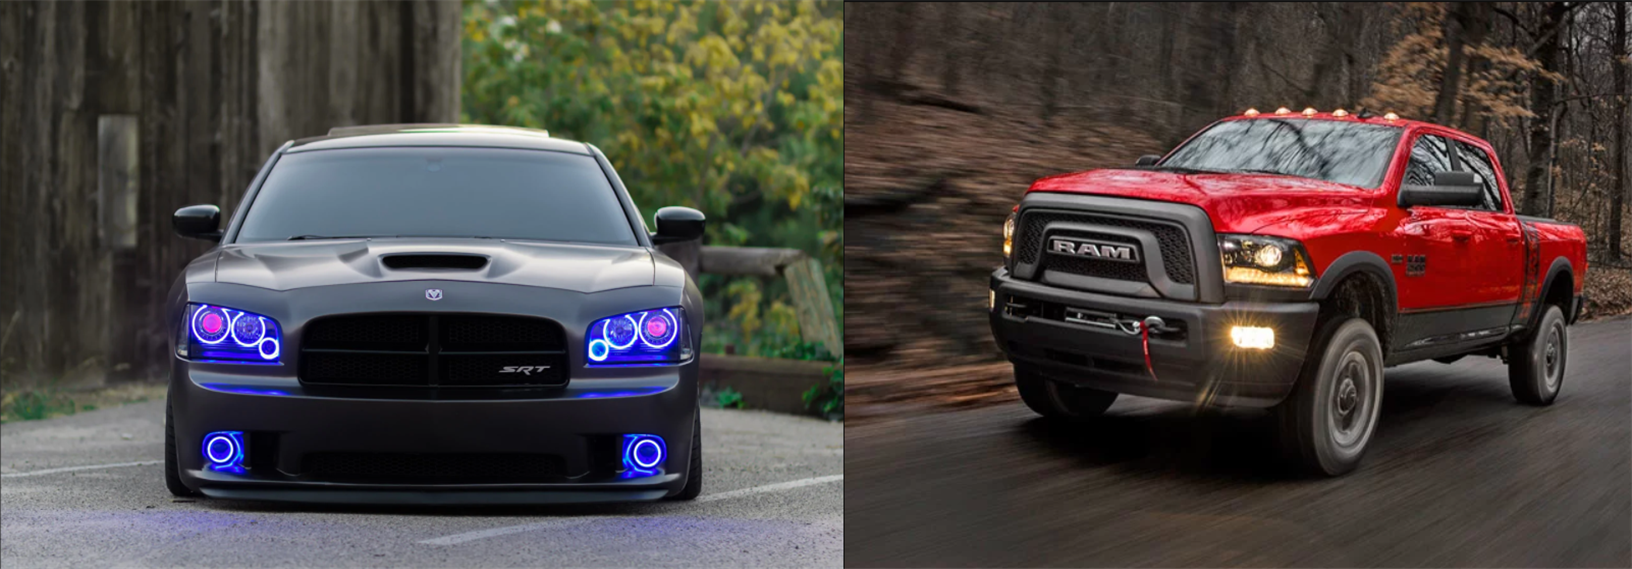 2022 Cool Car Accessories for Dodge Vehicles and Ram Trucks